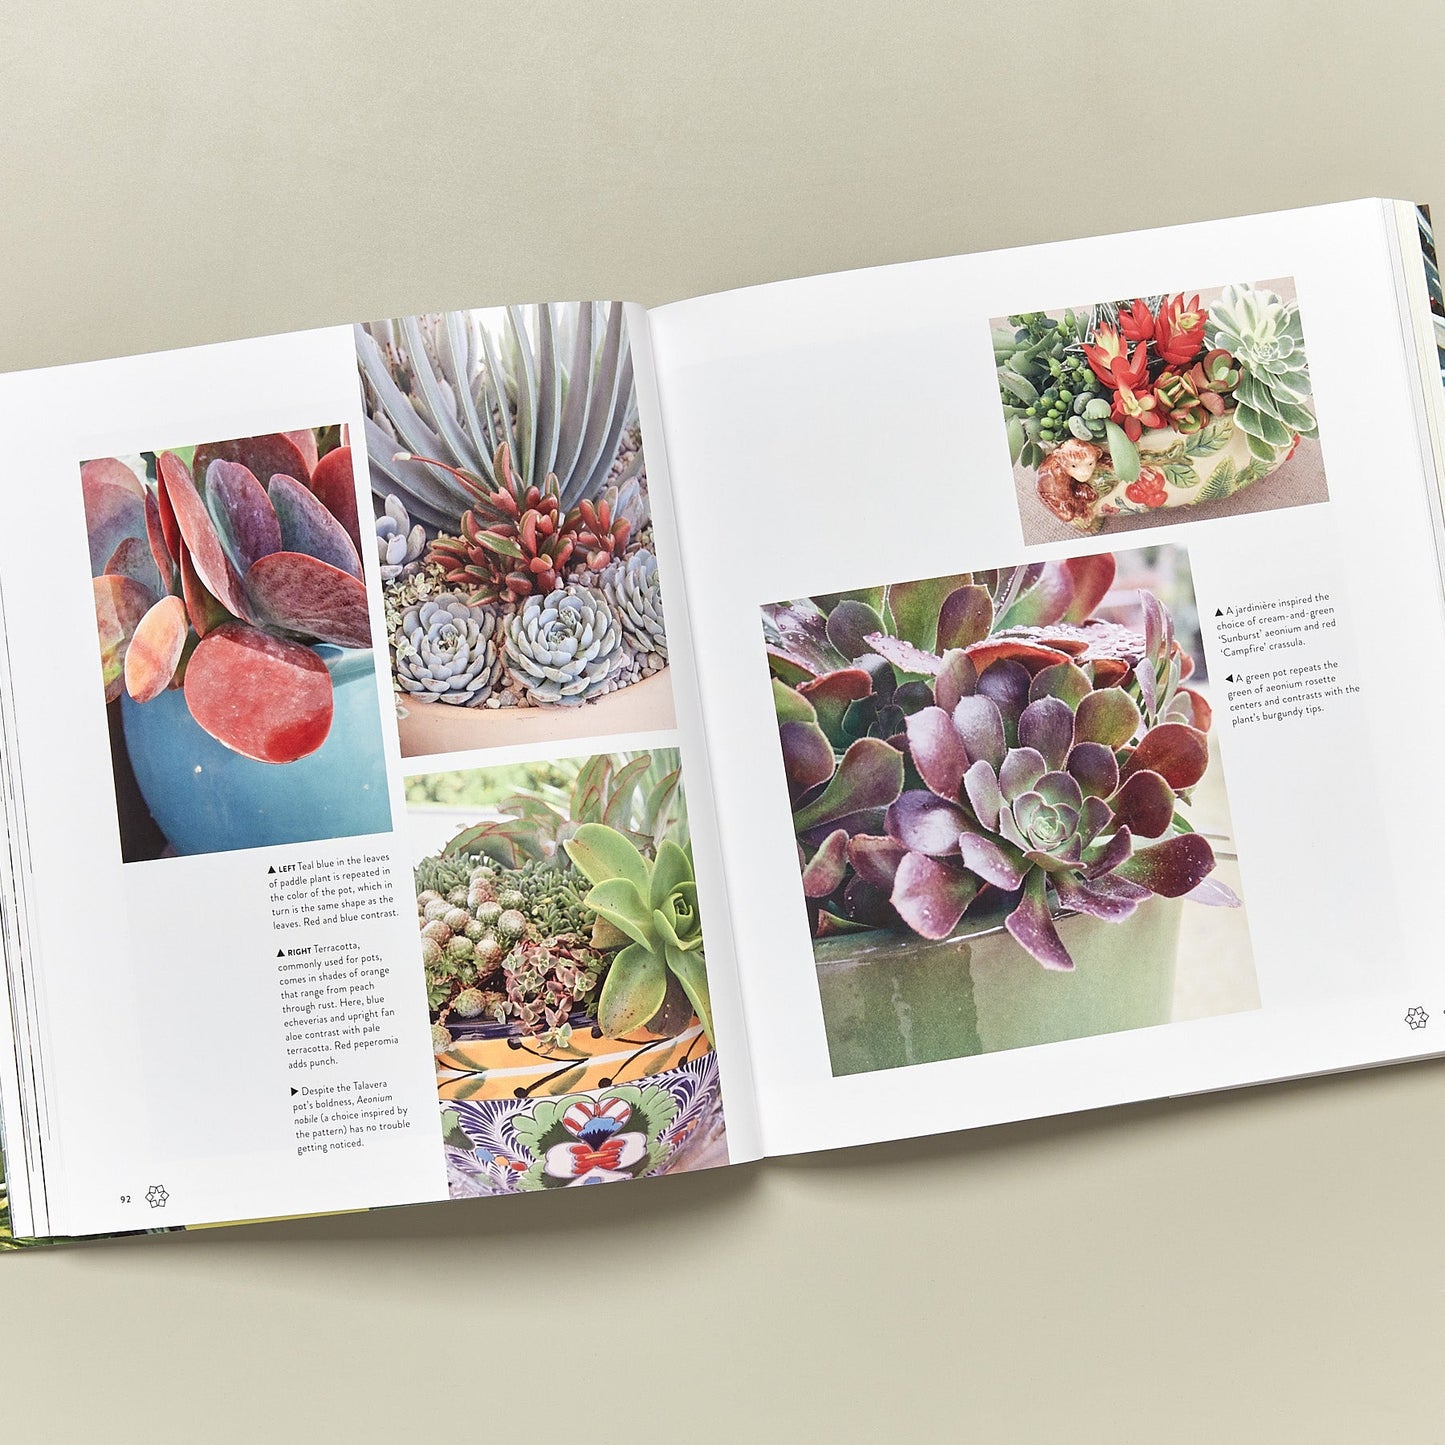 Book - Succulents Simplified